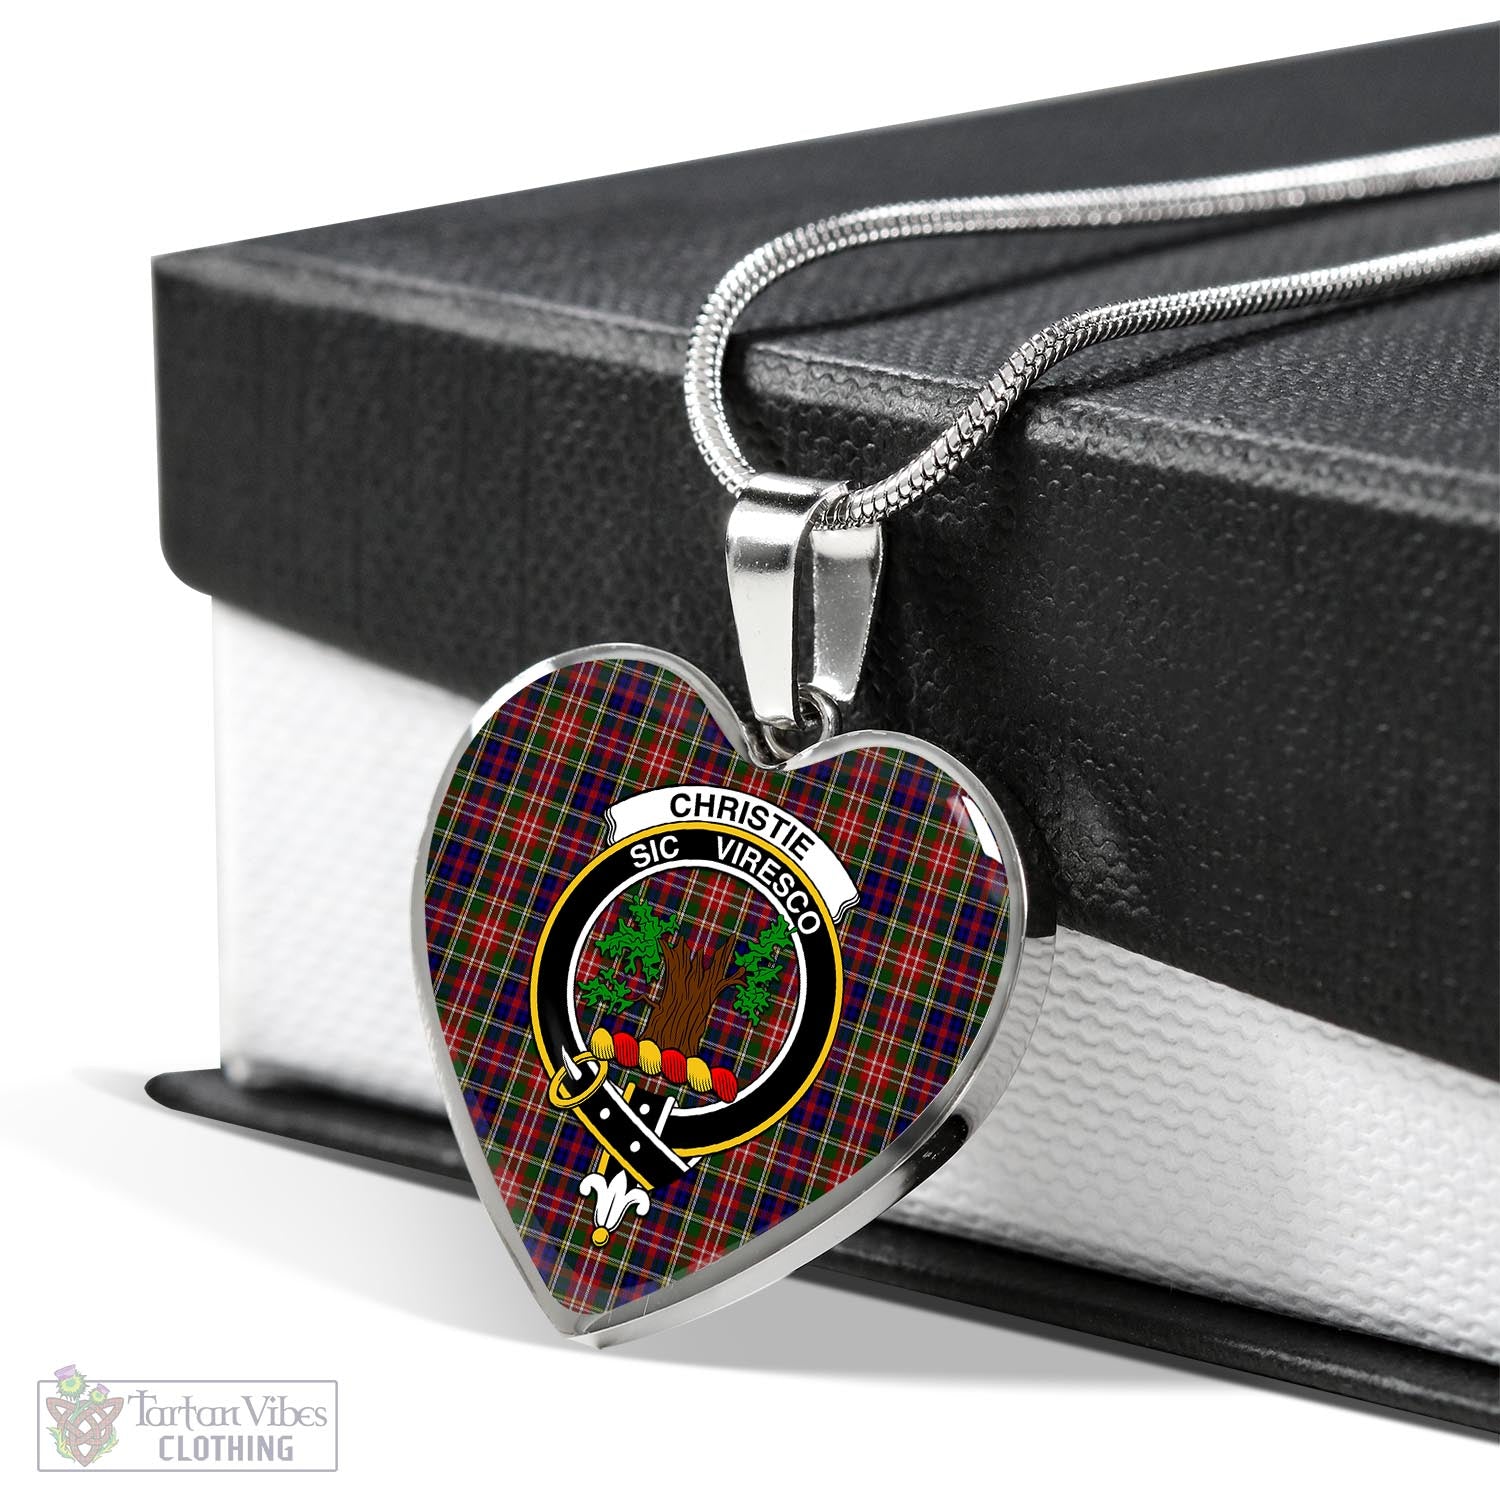 Tartan Vibes Clothing Christie Tartan Heart Necklace with Family Crest